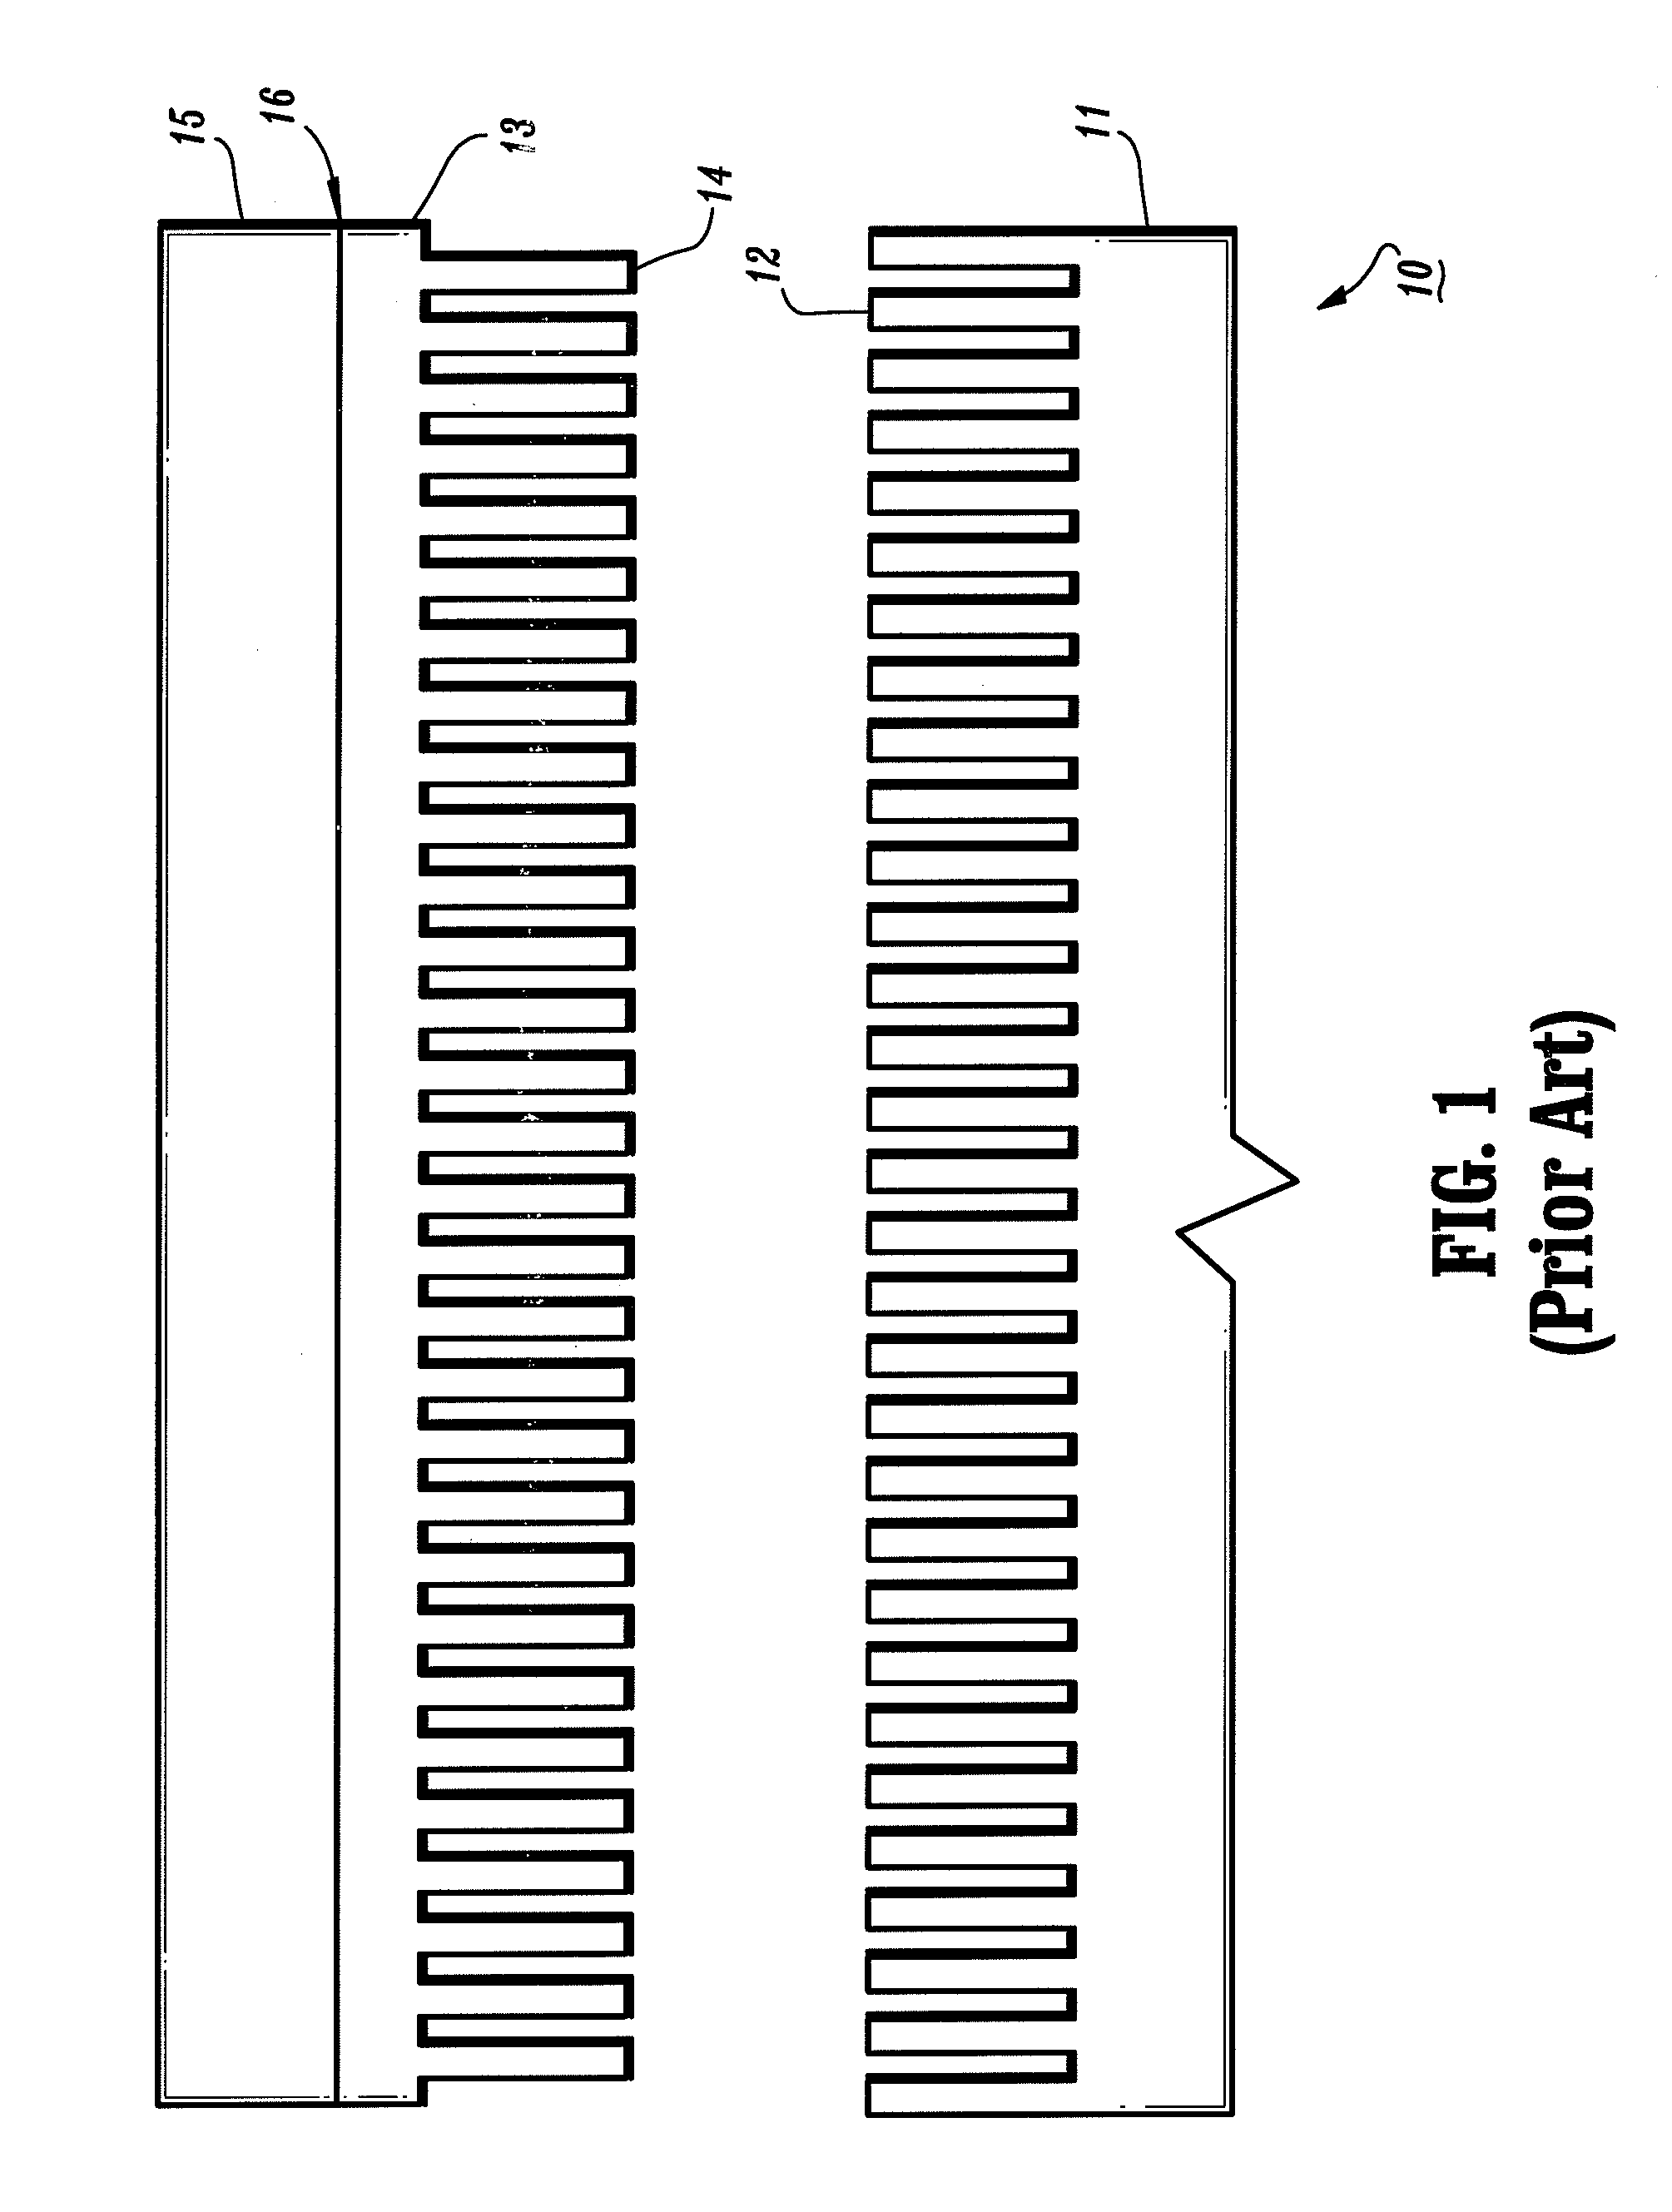 Apparatus and methods for cooling semiconductor integrated circuit package structures